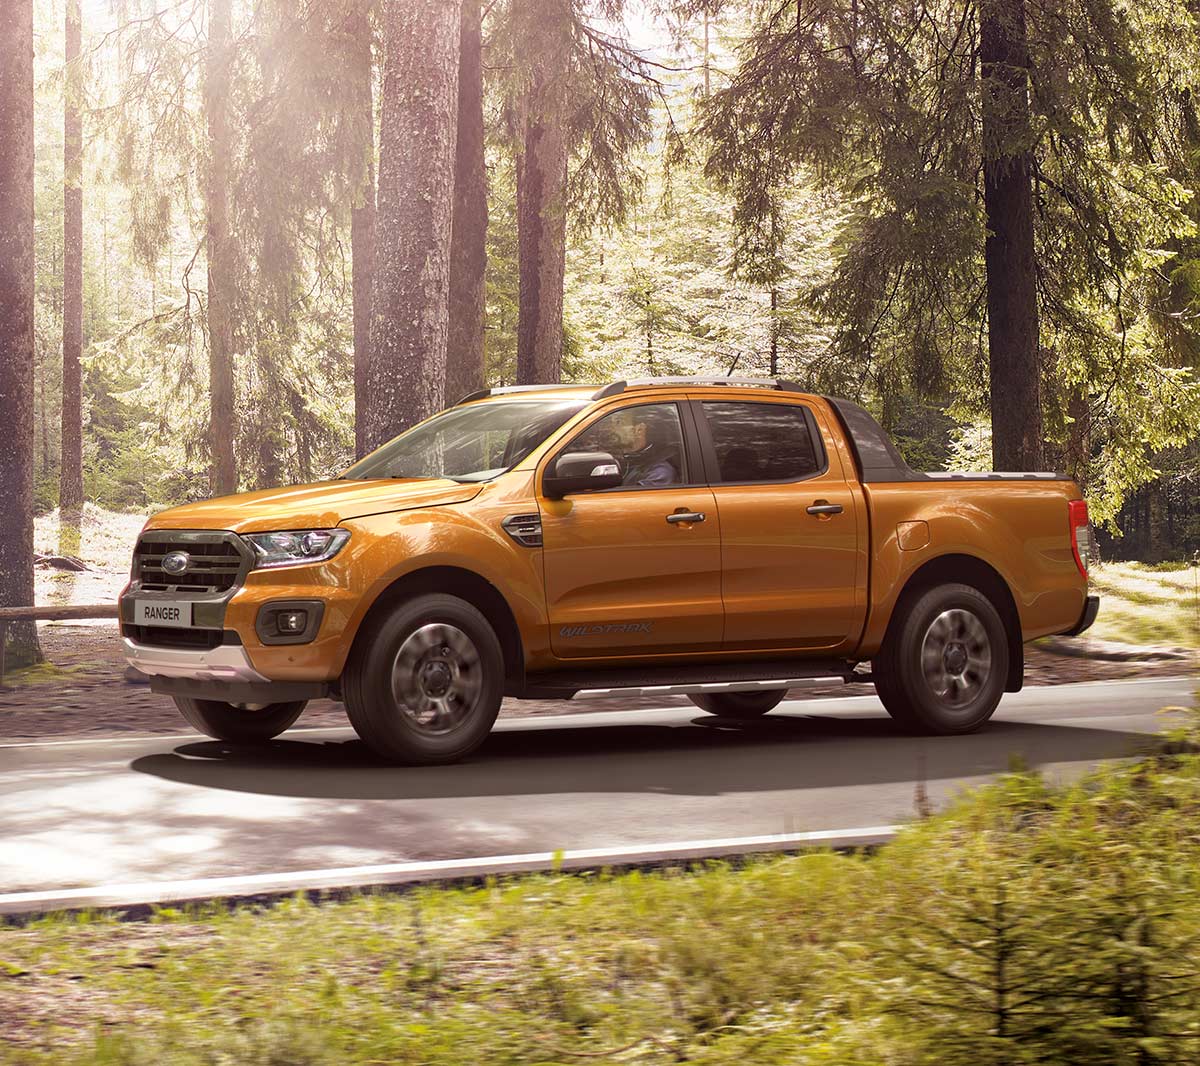 Orange Ford Ranger left-side view with trees in the background